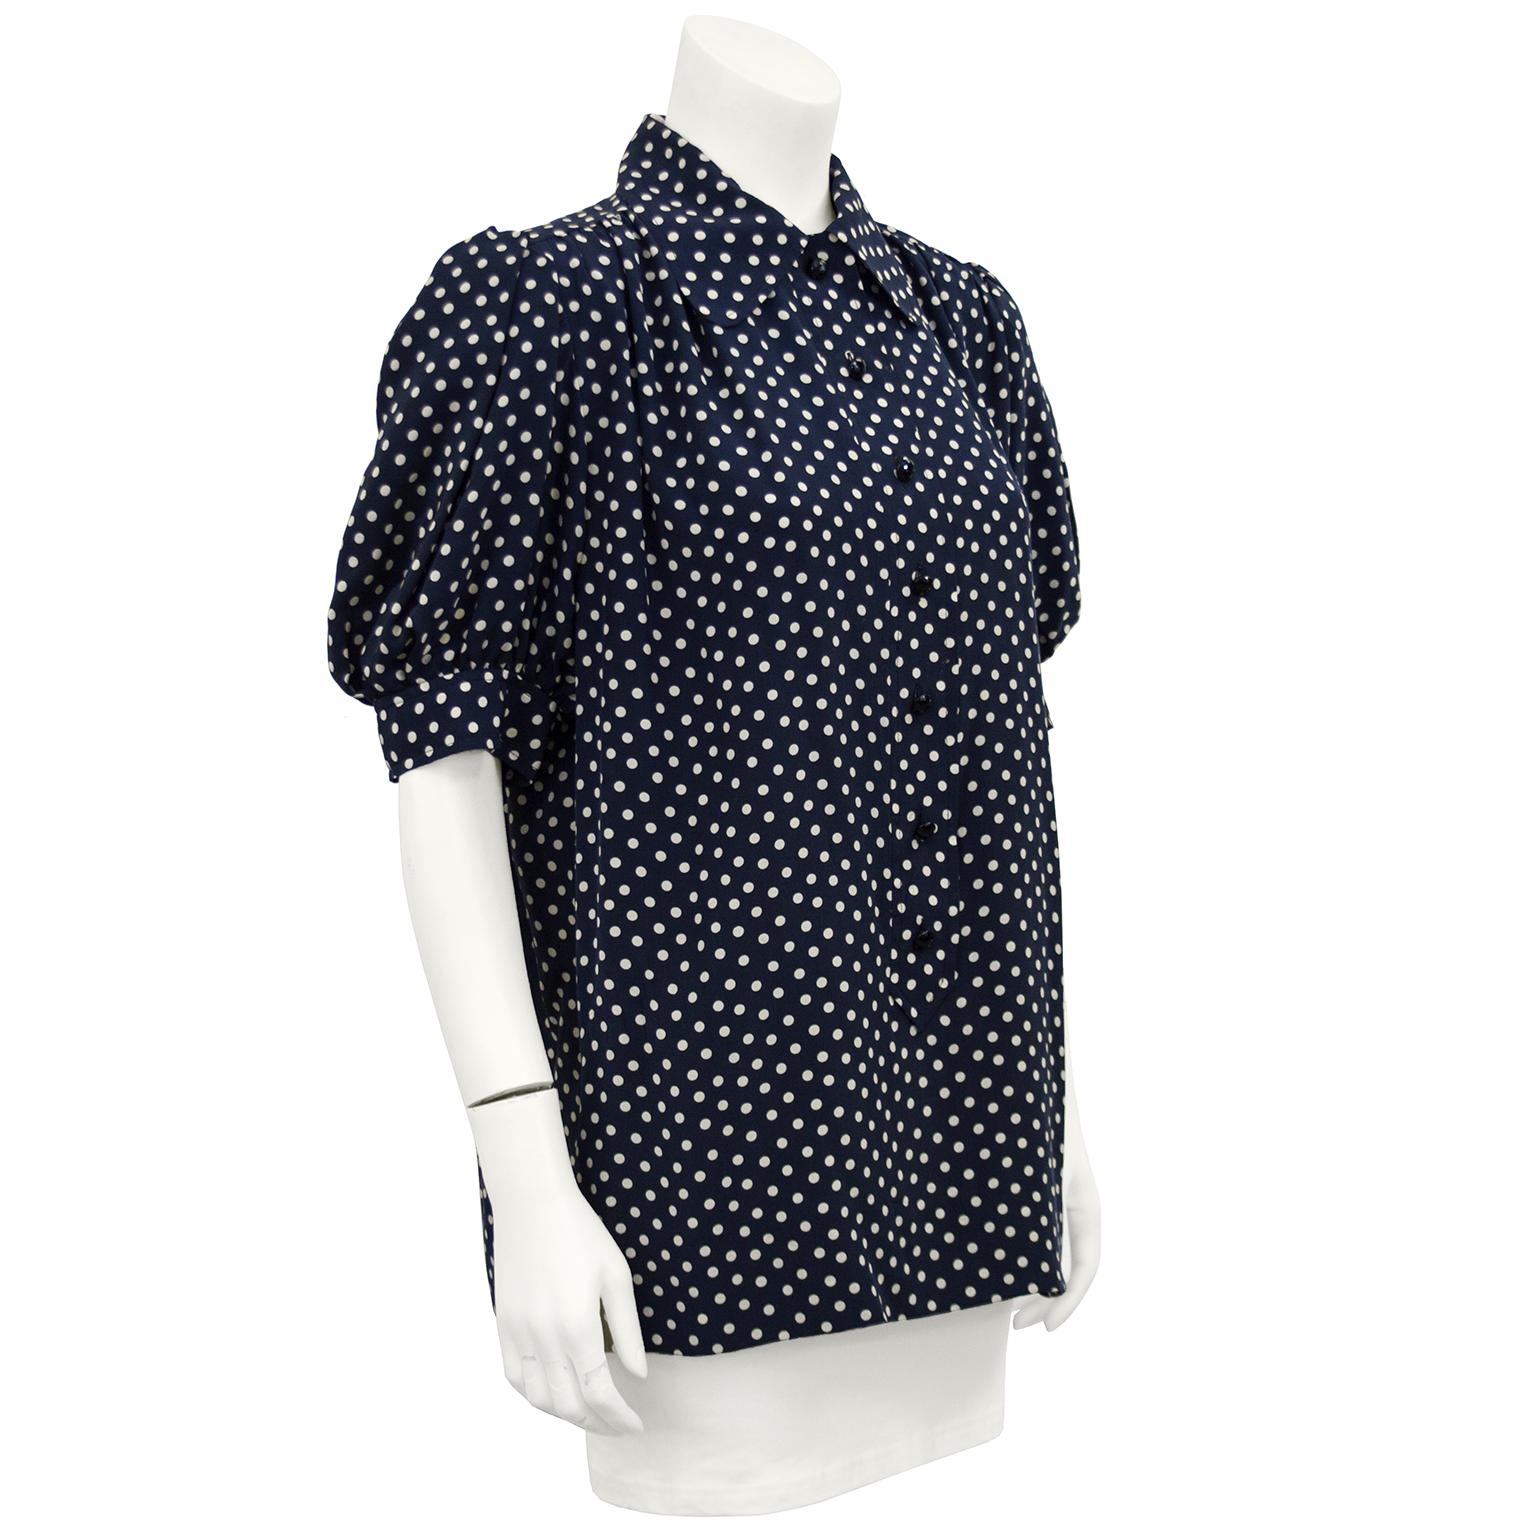 1980's YSL / Saint Laurent navy and white polka dot silk blouse with short gathered sleeve and slight gathering at the yoke. Very feminine fit button/placket front and gather at the shoulder. Full fit shape square across the bottom. Fits like a US